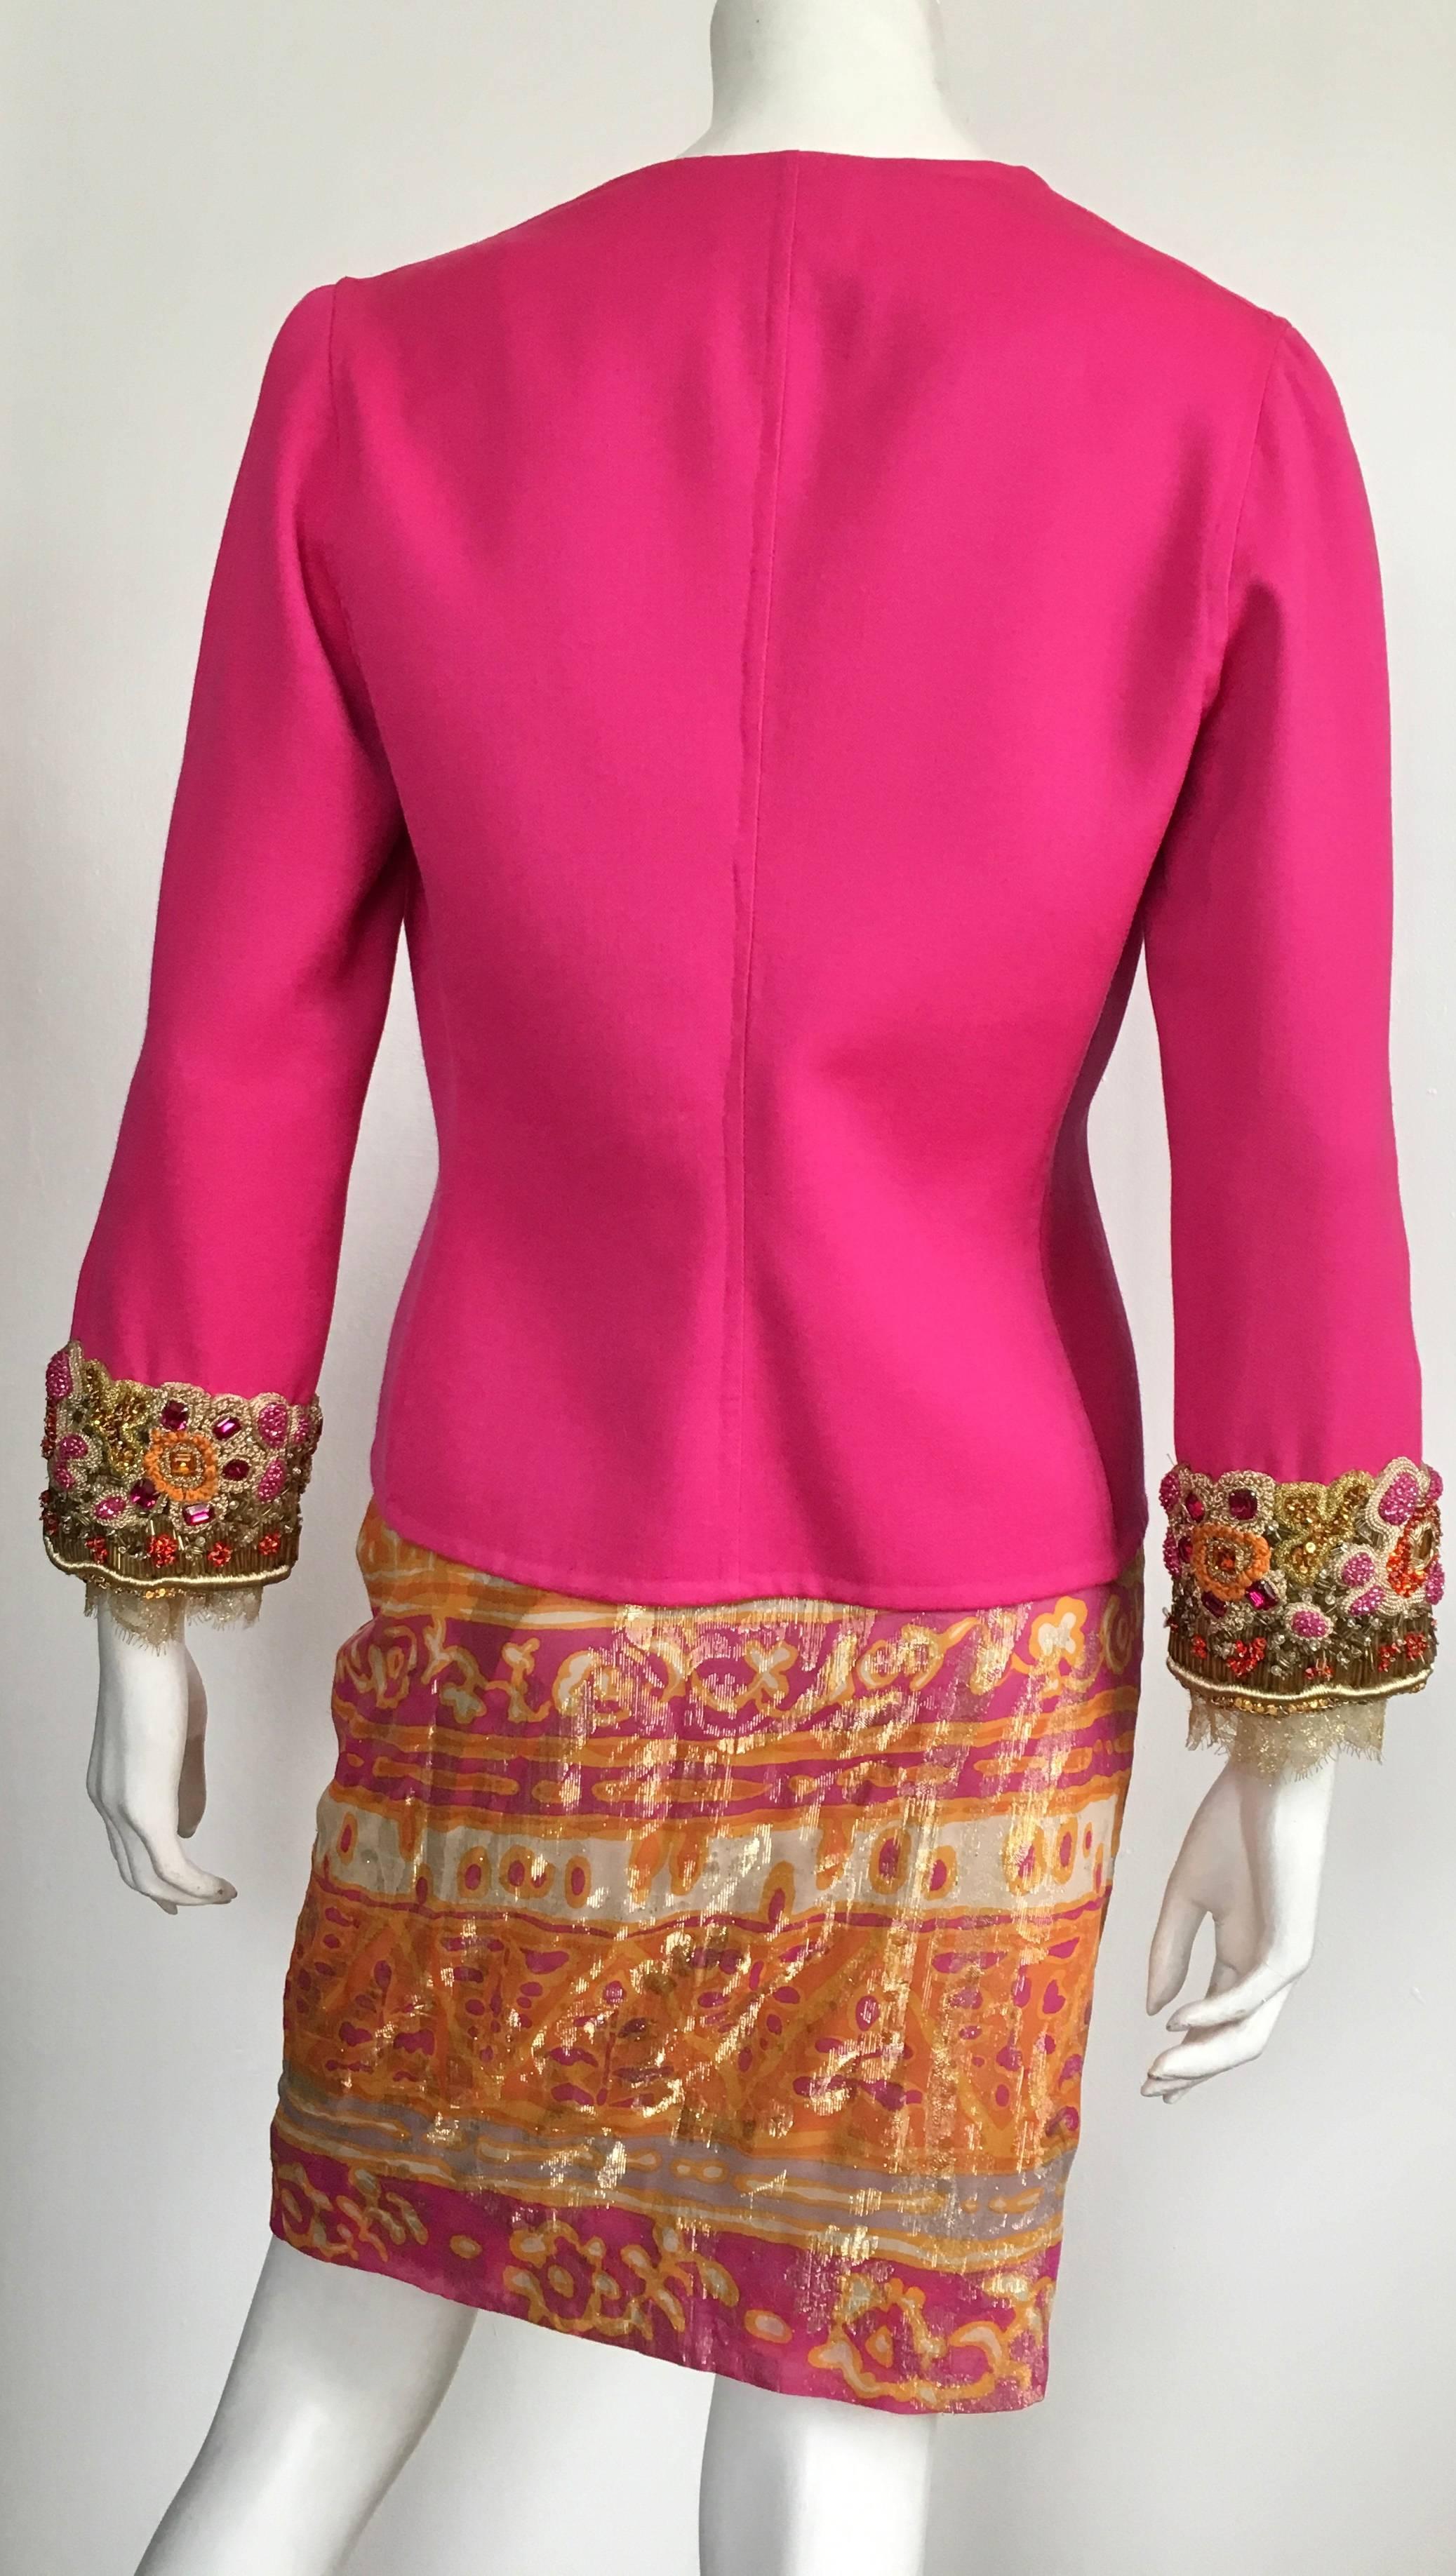 Pink Bill Blass for Saks Fifth Ave 1980s Beaded Jacket & Lace Skirt set Size 6. For Sale